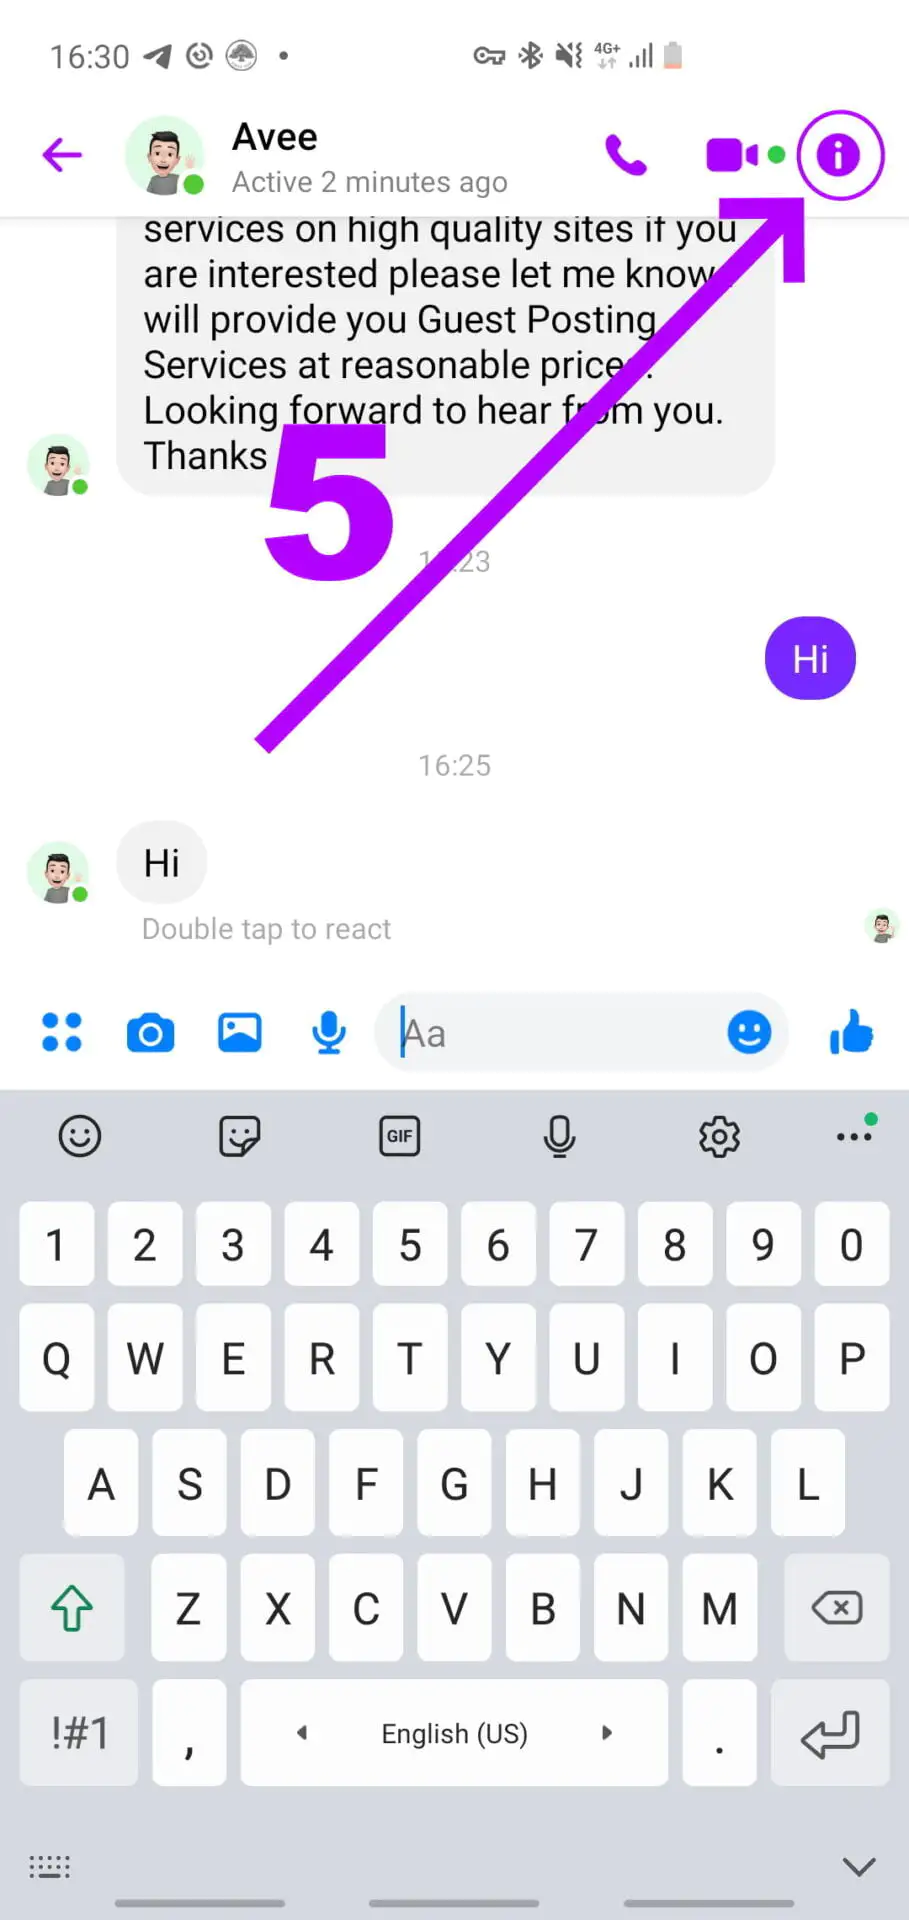 Can i remove pictures i posted in a facebook chat